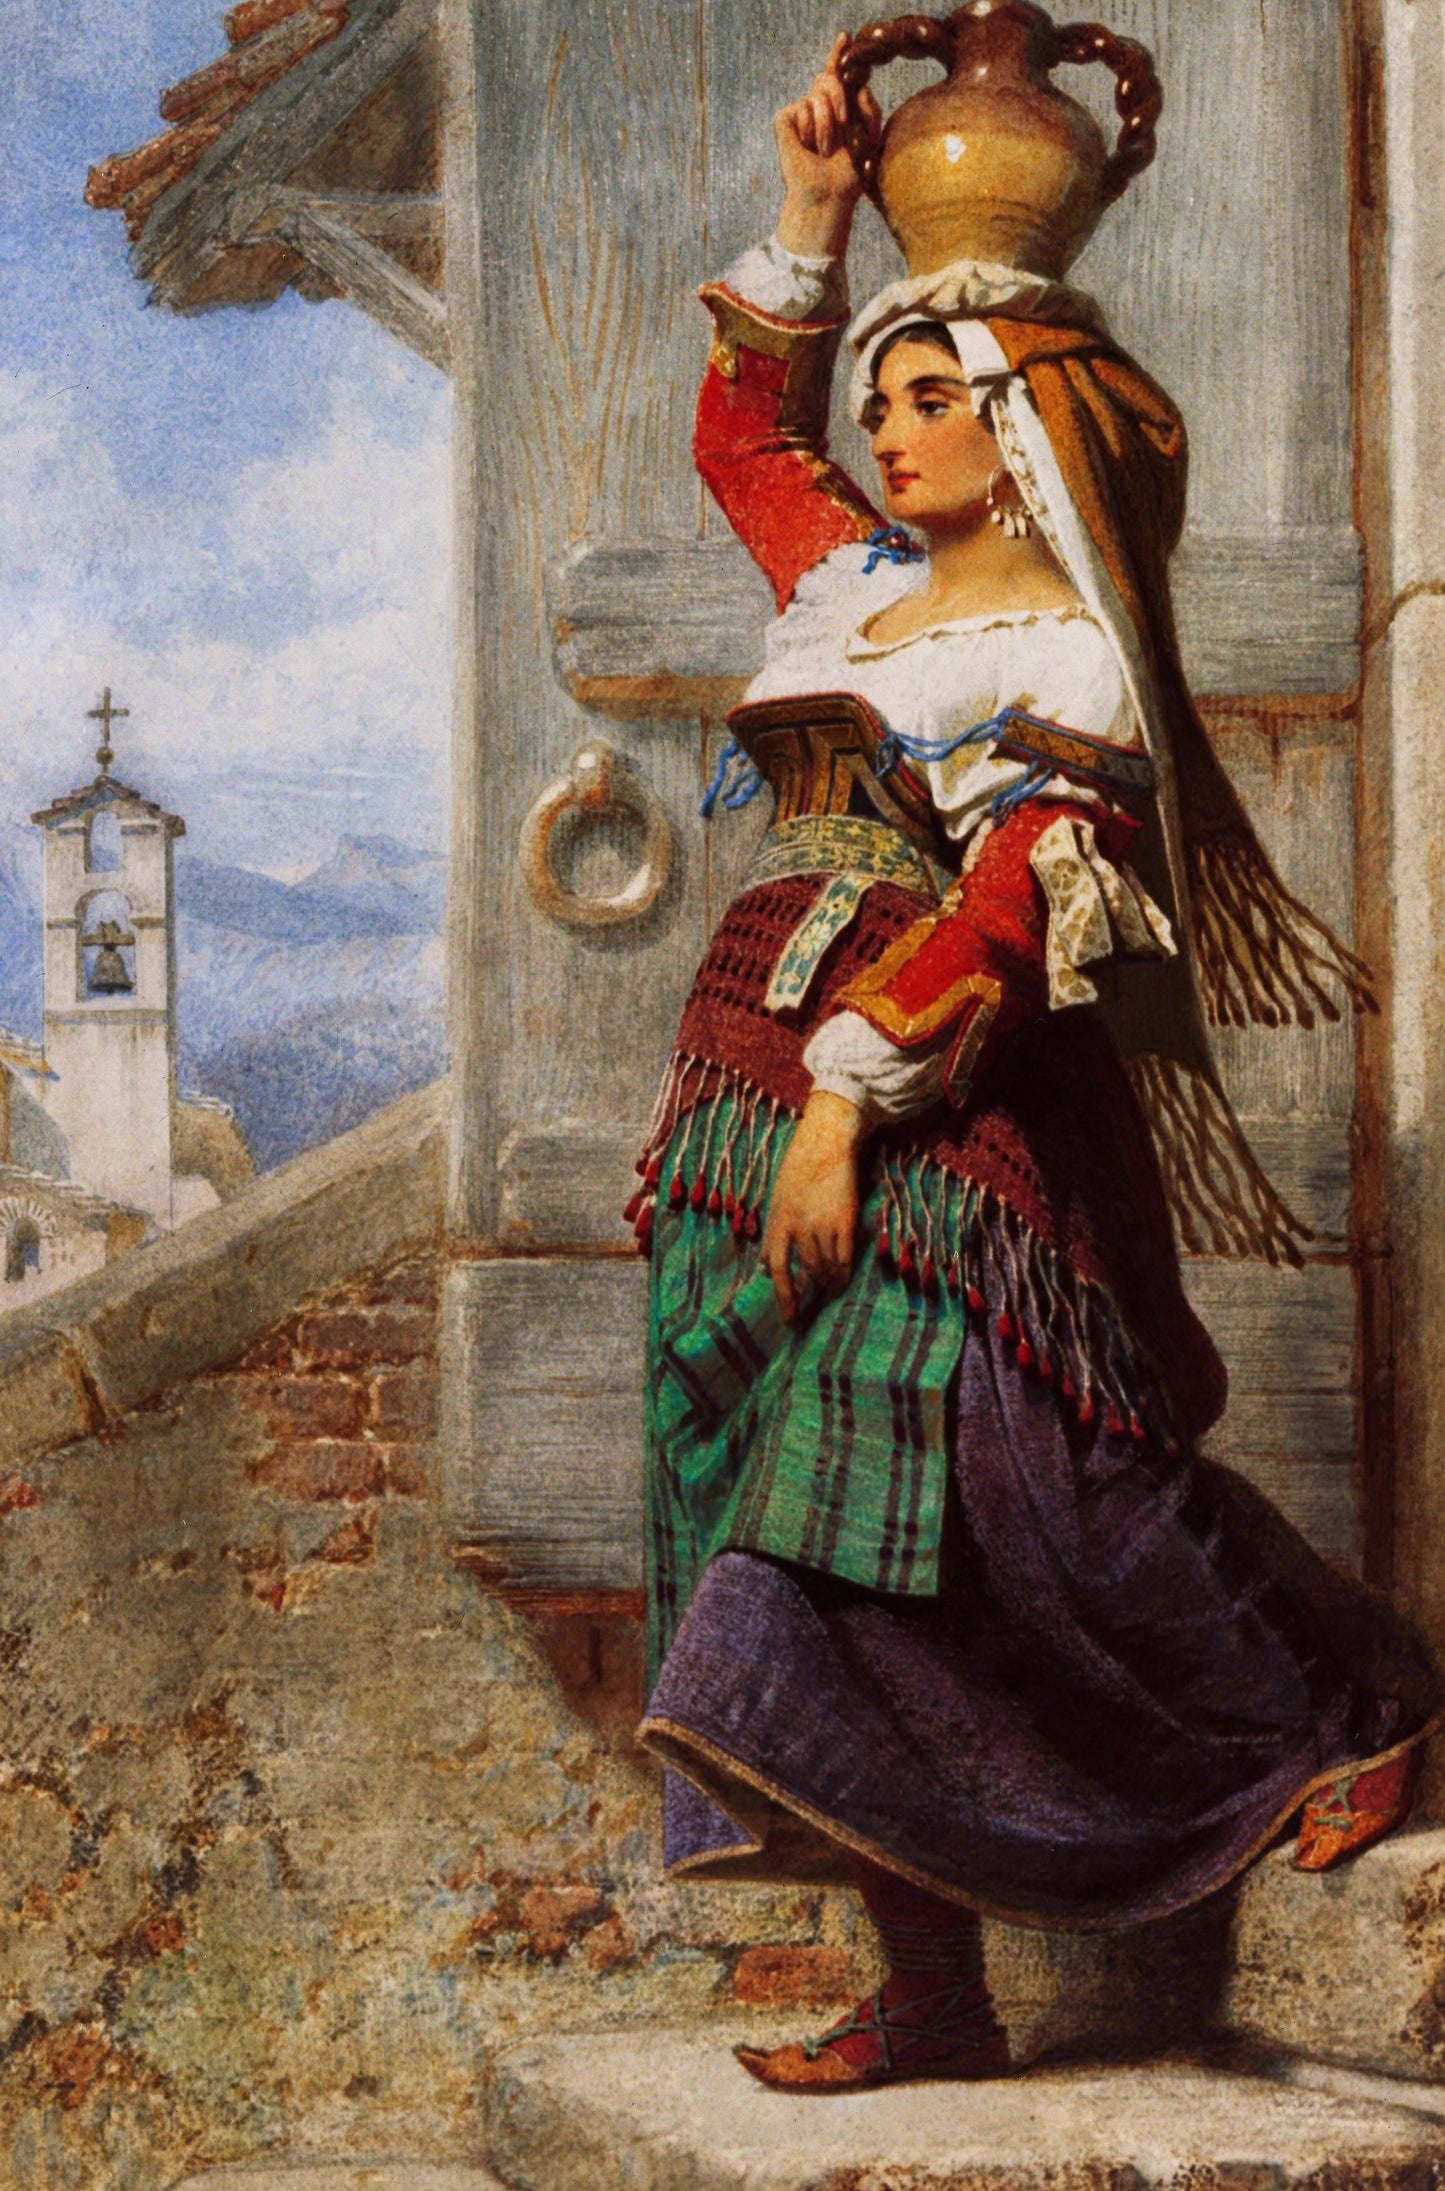 'A Water Carrier, By Carl Haag" size 80x120cm | JadedGemShop Diamond Painting Kit